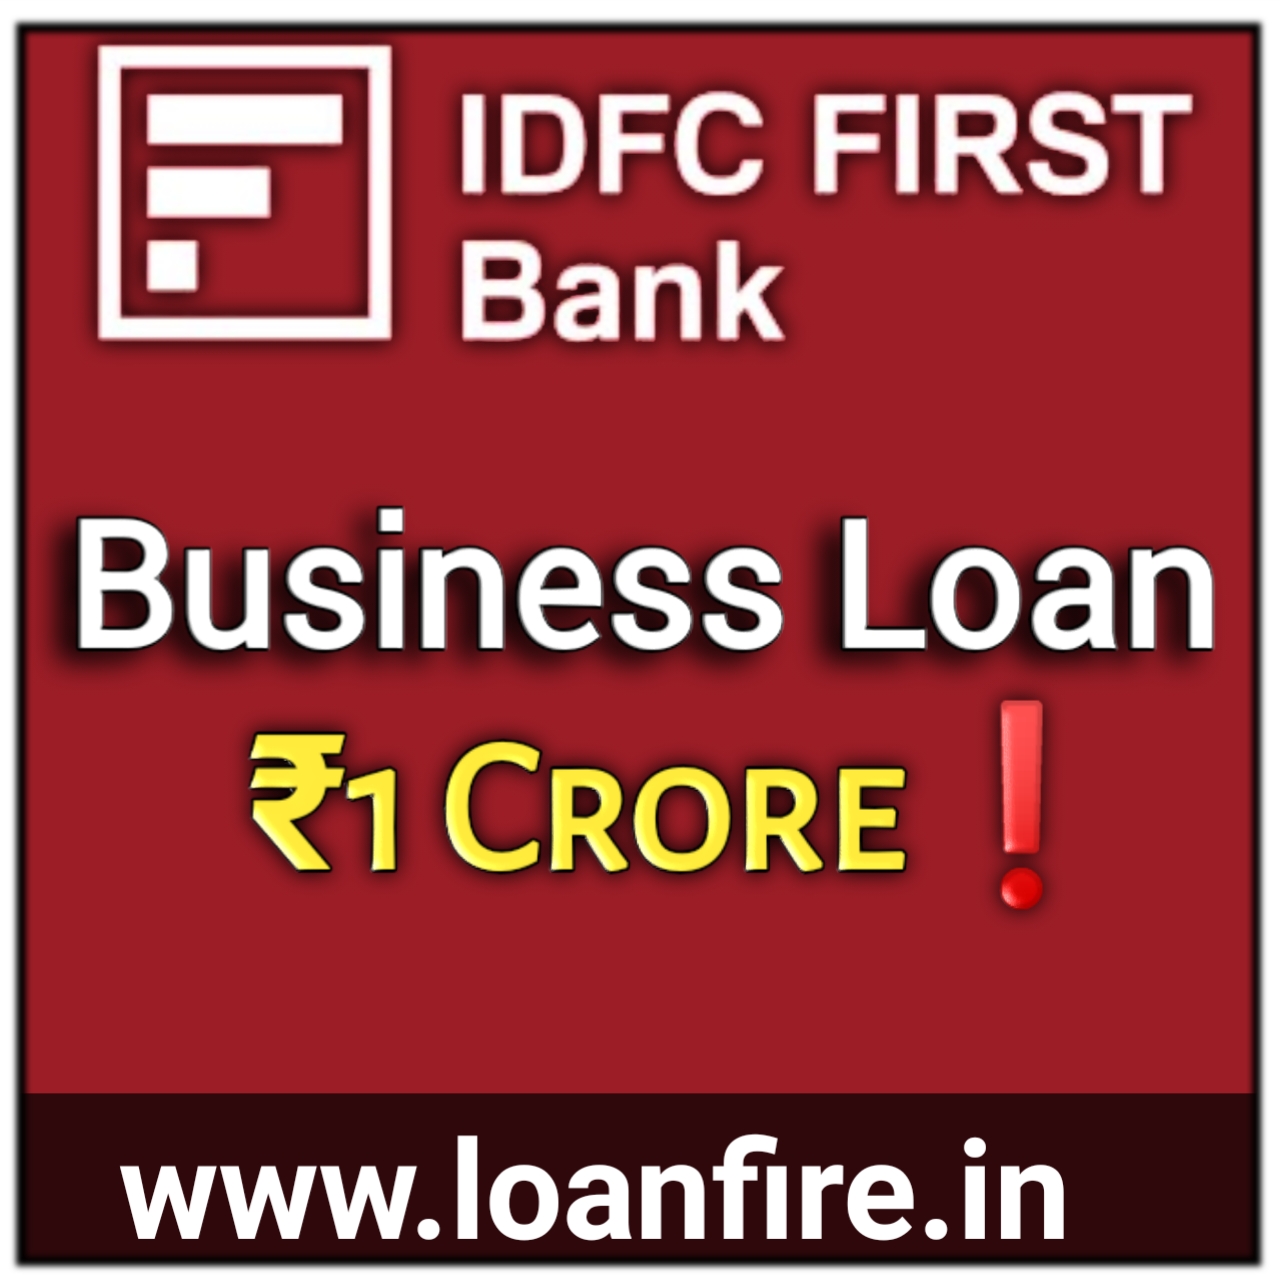 IDFC First Bank Business Loan Loan Amount | How much business loan can I get from IDFC First Bank?